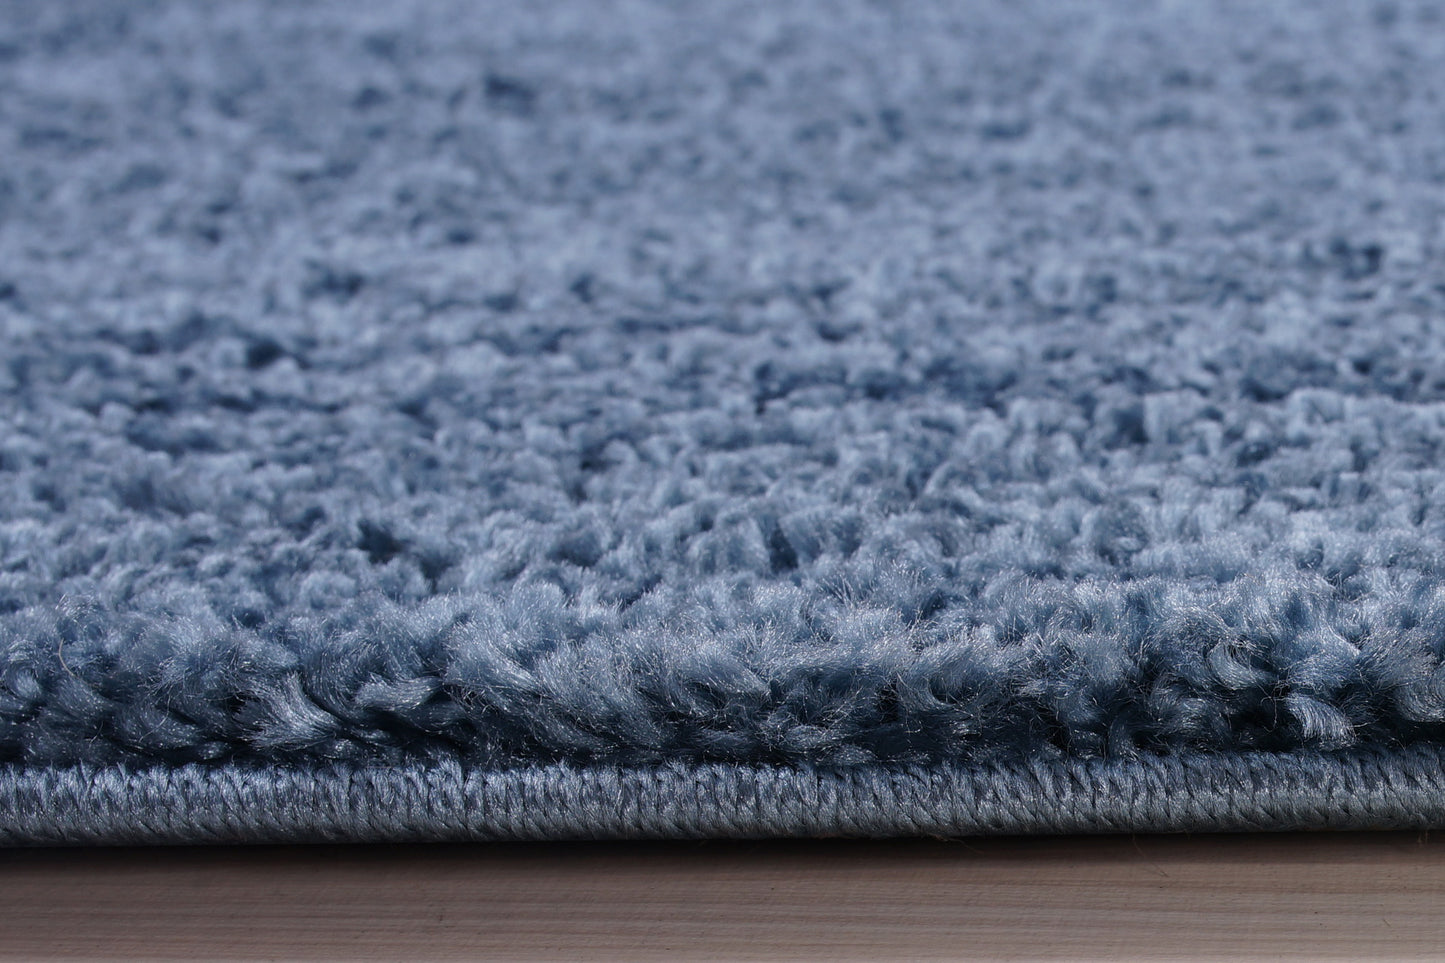 ladole rugs solid color shaggy meknes durable beautiful turkish indoor small mat doormat rug in blue 110 x 211 57cm x 90cm 2x8, 3x10, 2x10 ft Long Runner Rug, Hallway, Balcony, Entry Way, Kitchen, Stairs